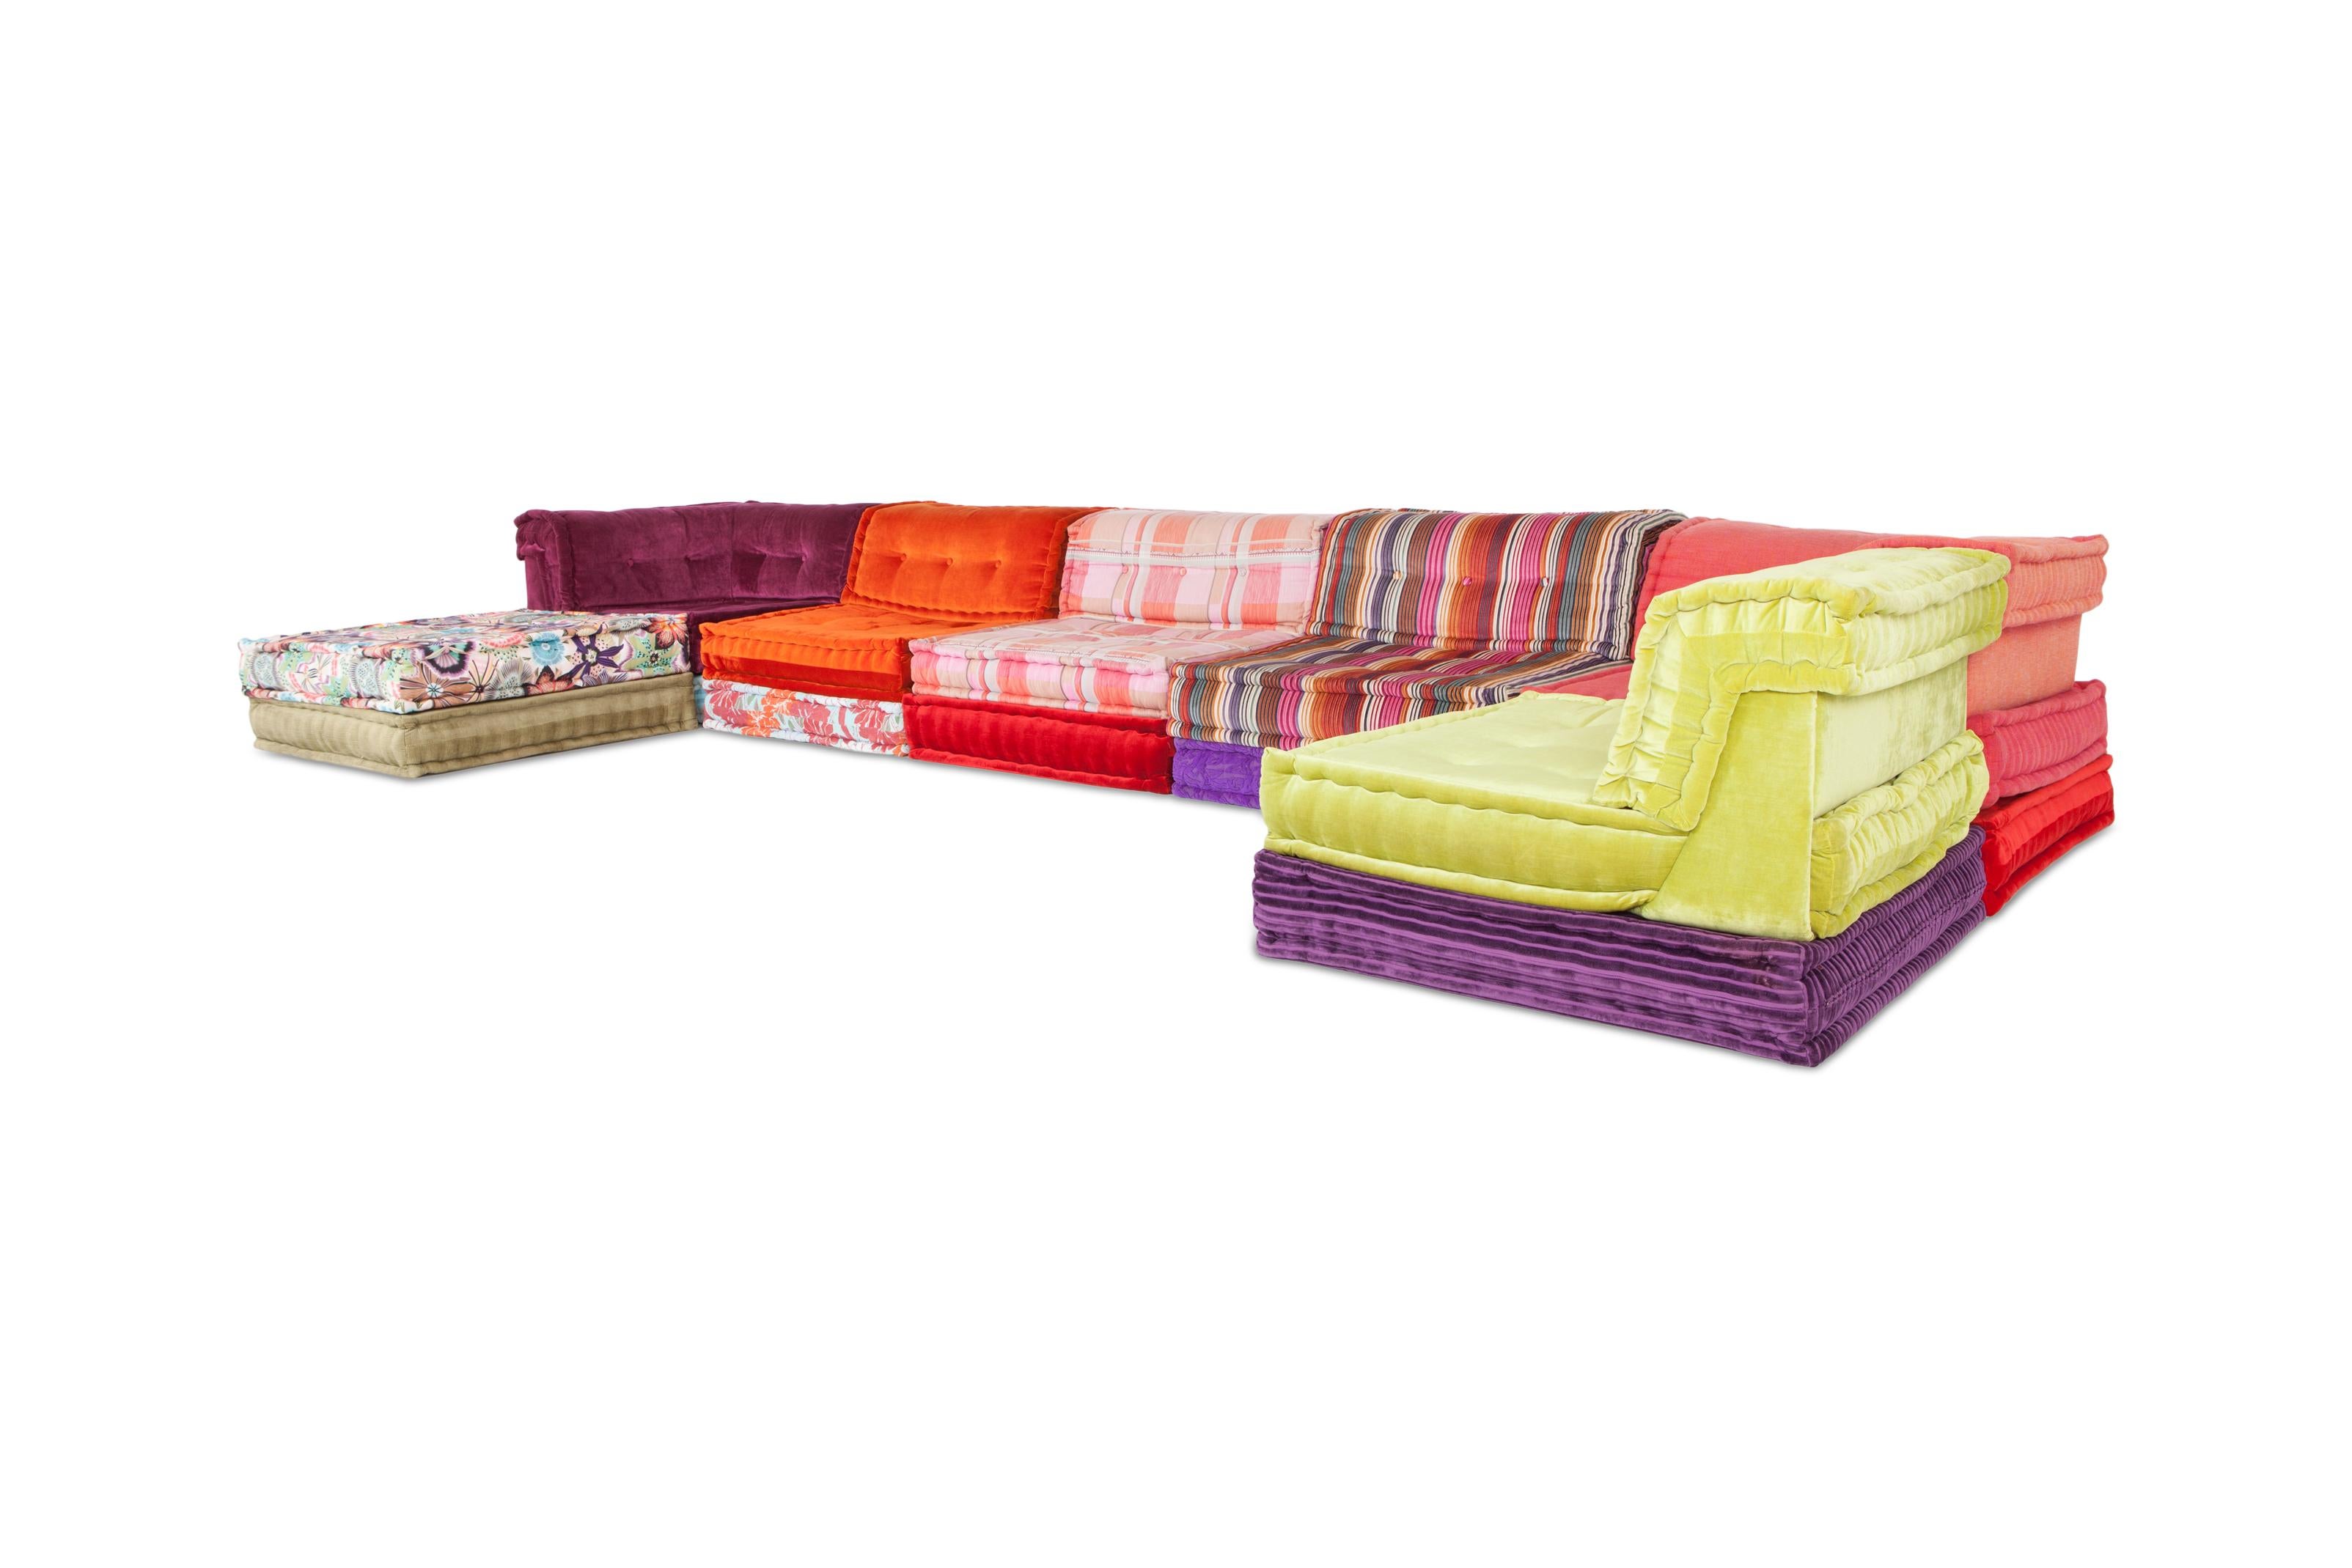 Roche Bobois modular sofa composition.

This unique sofa consists out of 20 different elements, their modular build makes it possible to arrange the sofa to every personal liking. There are endless combinations possible.

The sofa is upholstered